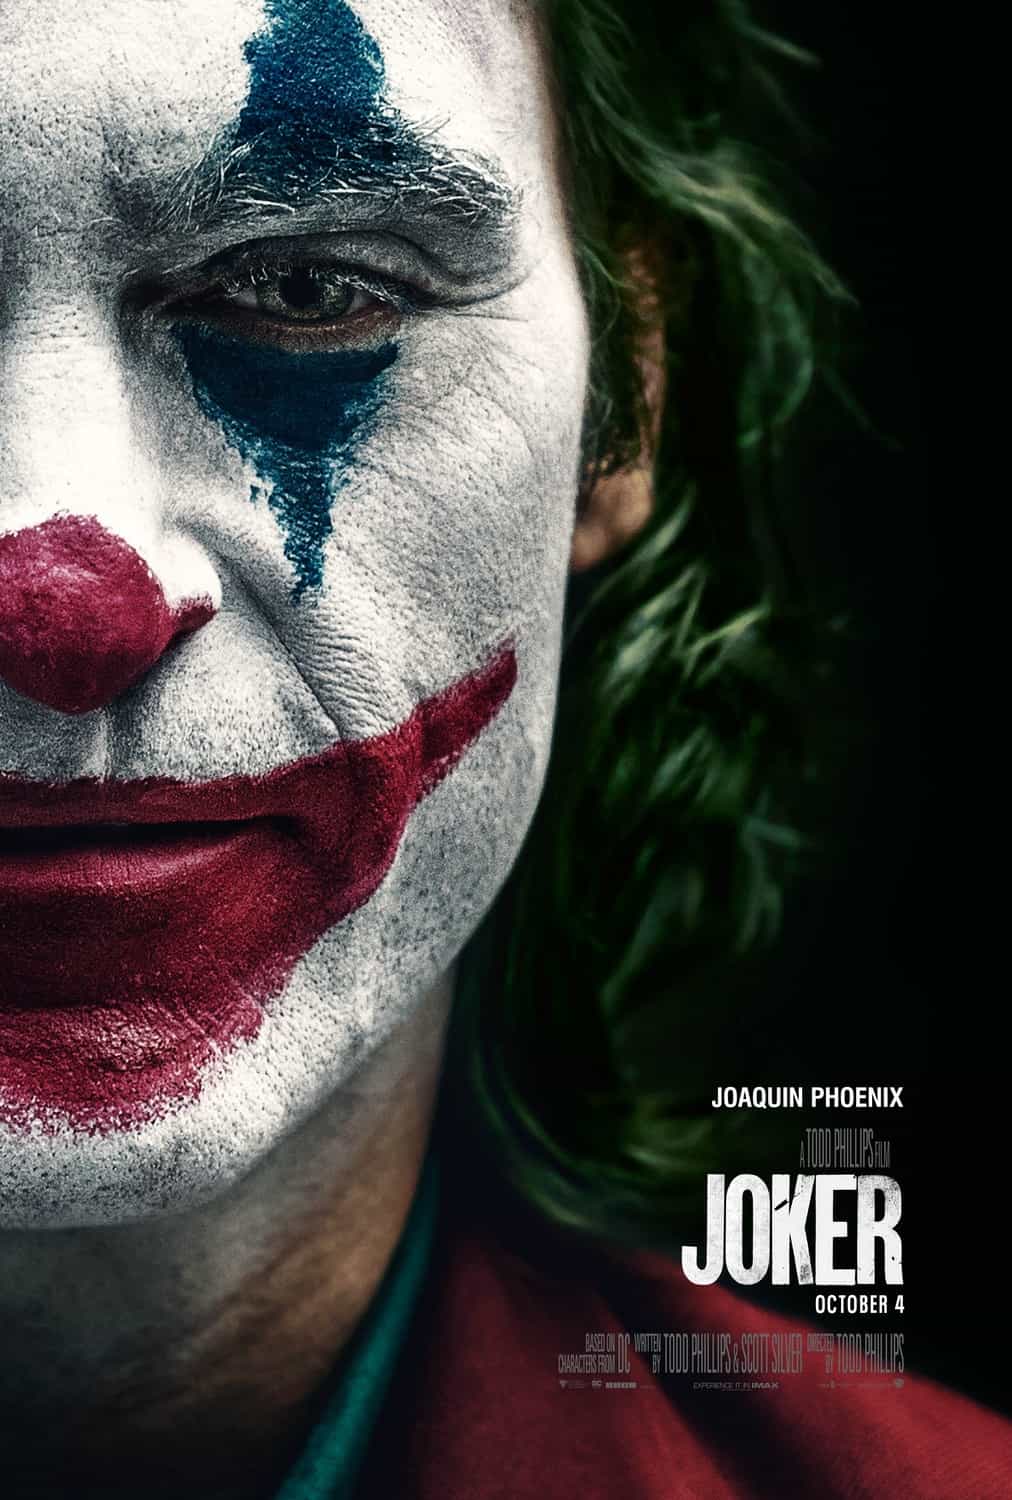 UK Box Office Analysis 25th - 27th October 2019:  Joker defies the odds and spends a fourth weekend at the top leaving Terminator: Dark Fate to debut at two